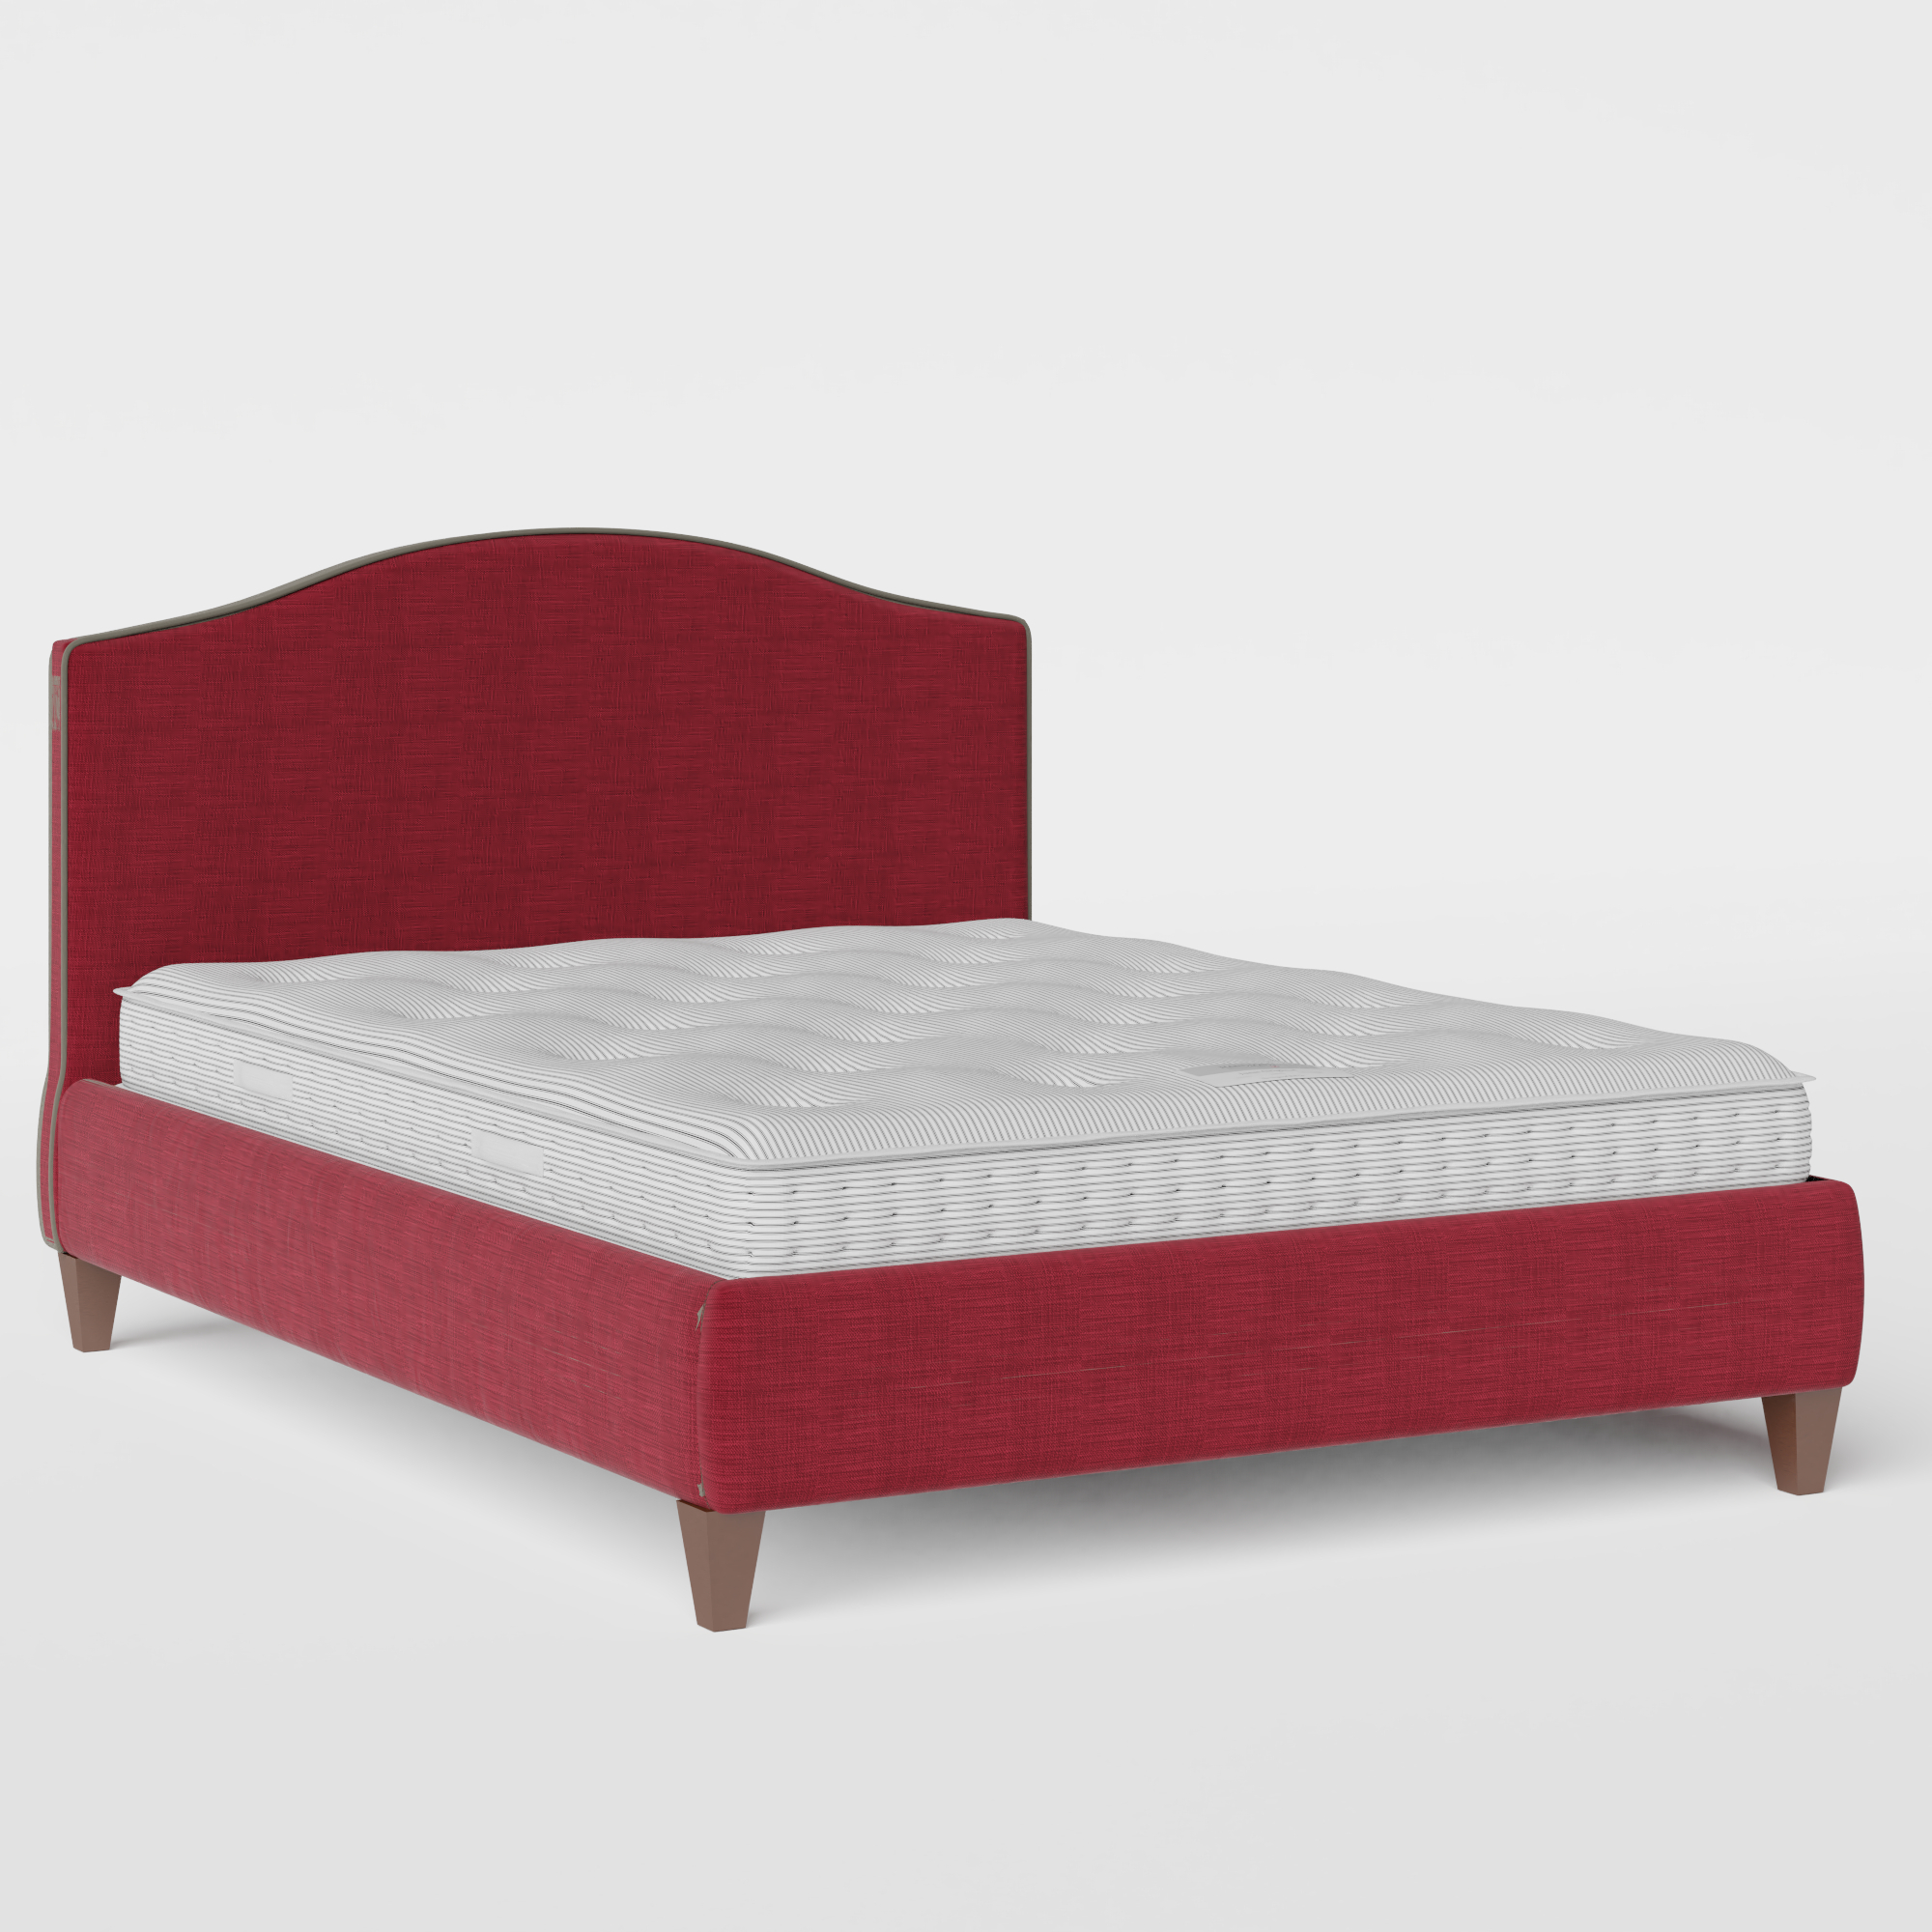 Daniella with Piping upholstered bed in cherry fabric